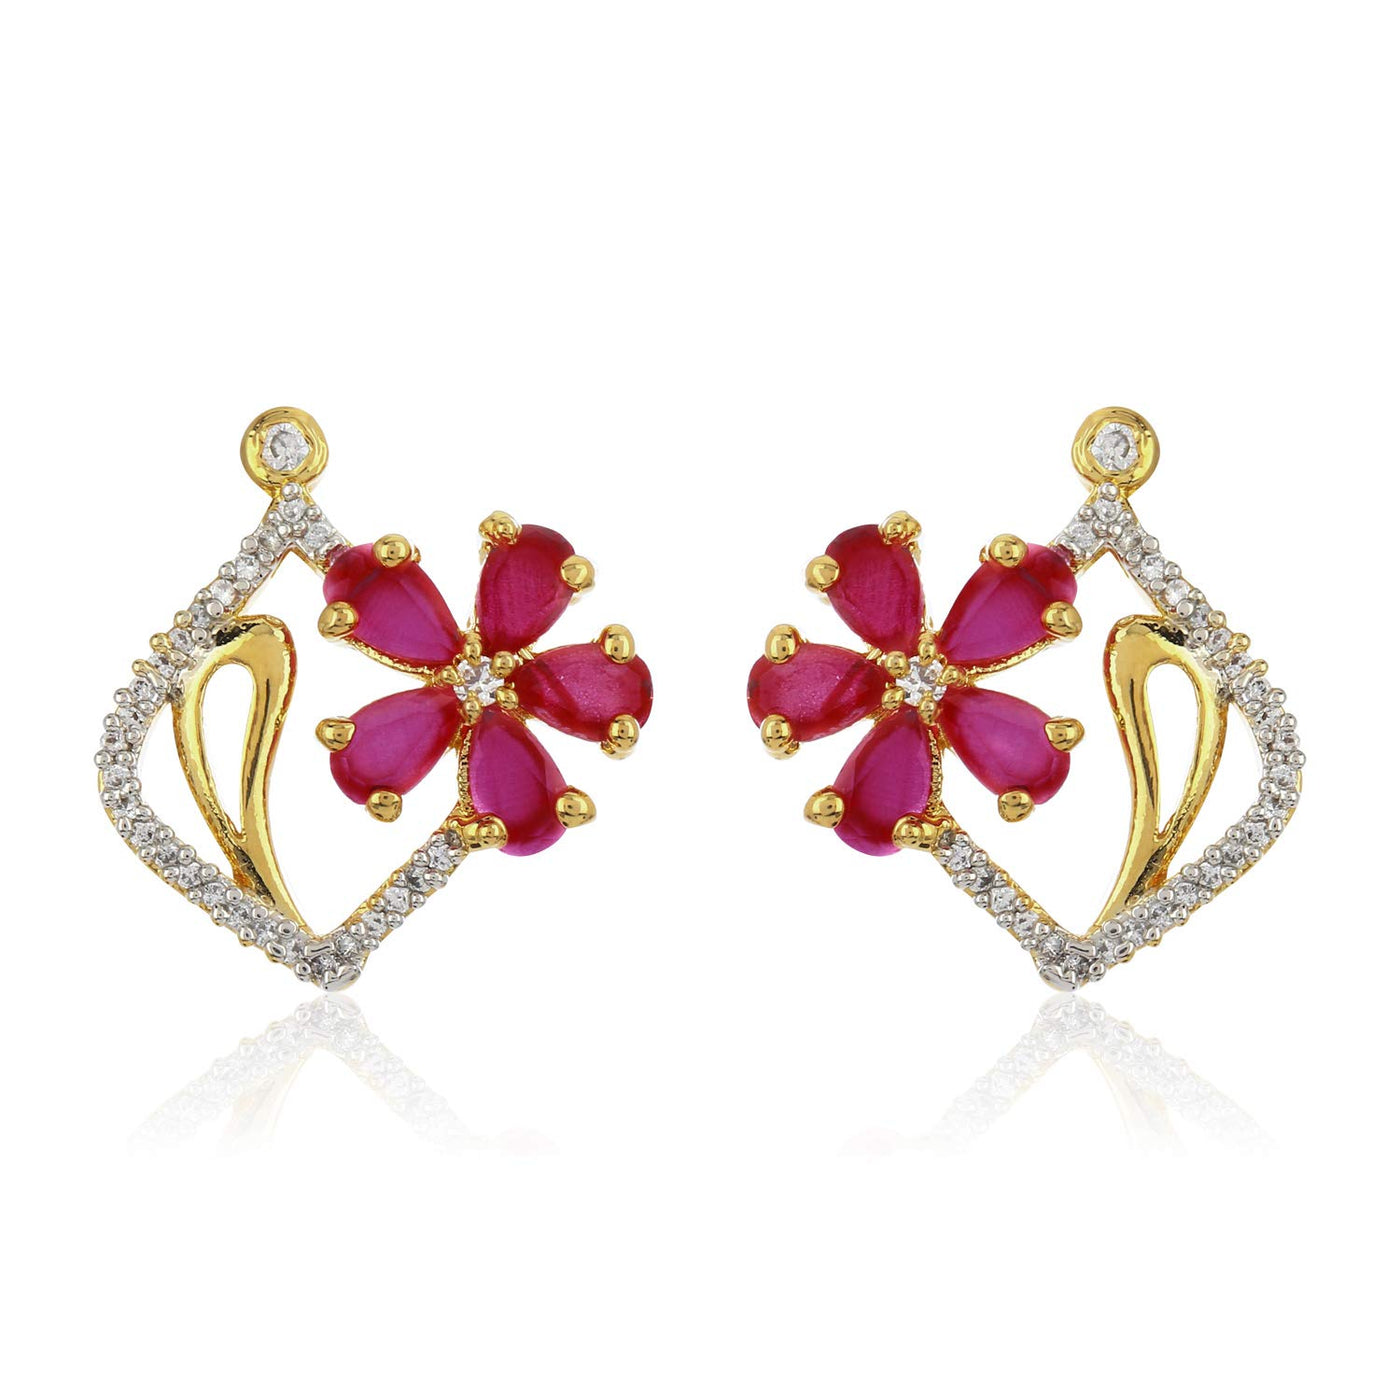 Estele Valentines Day Gift For Wife Special American Diamond Earrings For Girls & Women